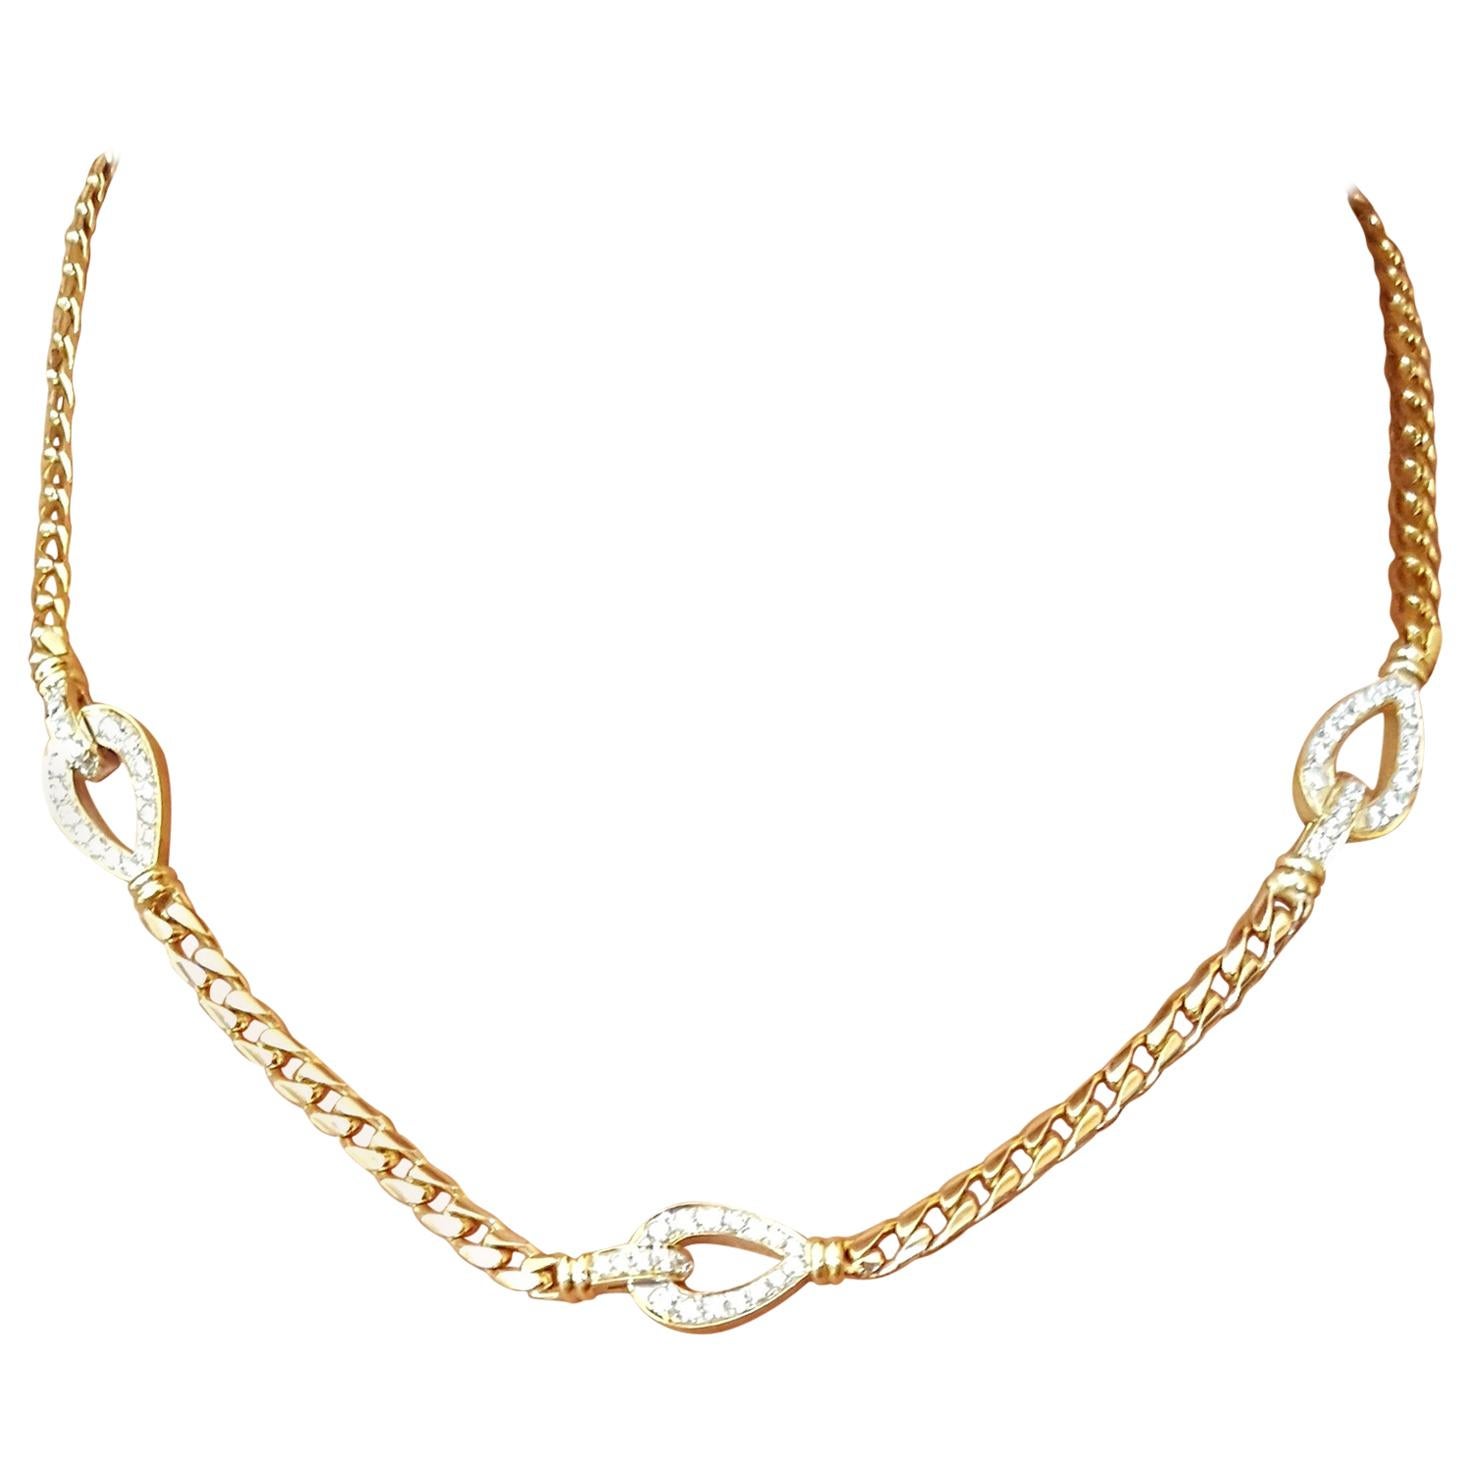 18kt Yellow Gold 1.77cttw Diamond Curb Link Necklace, 46 gr, 19 In, Solid Heavy For Sale